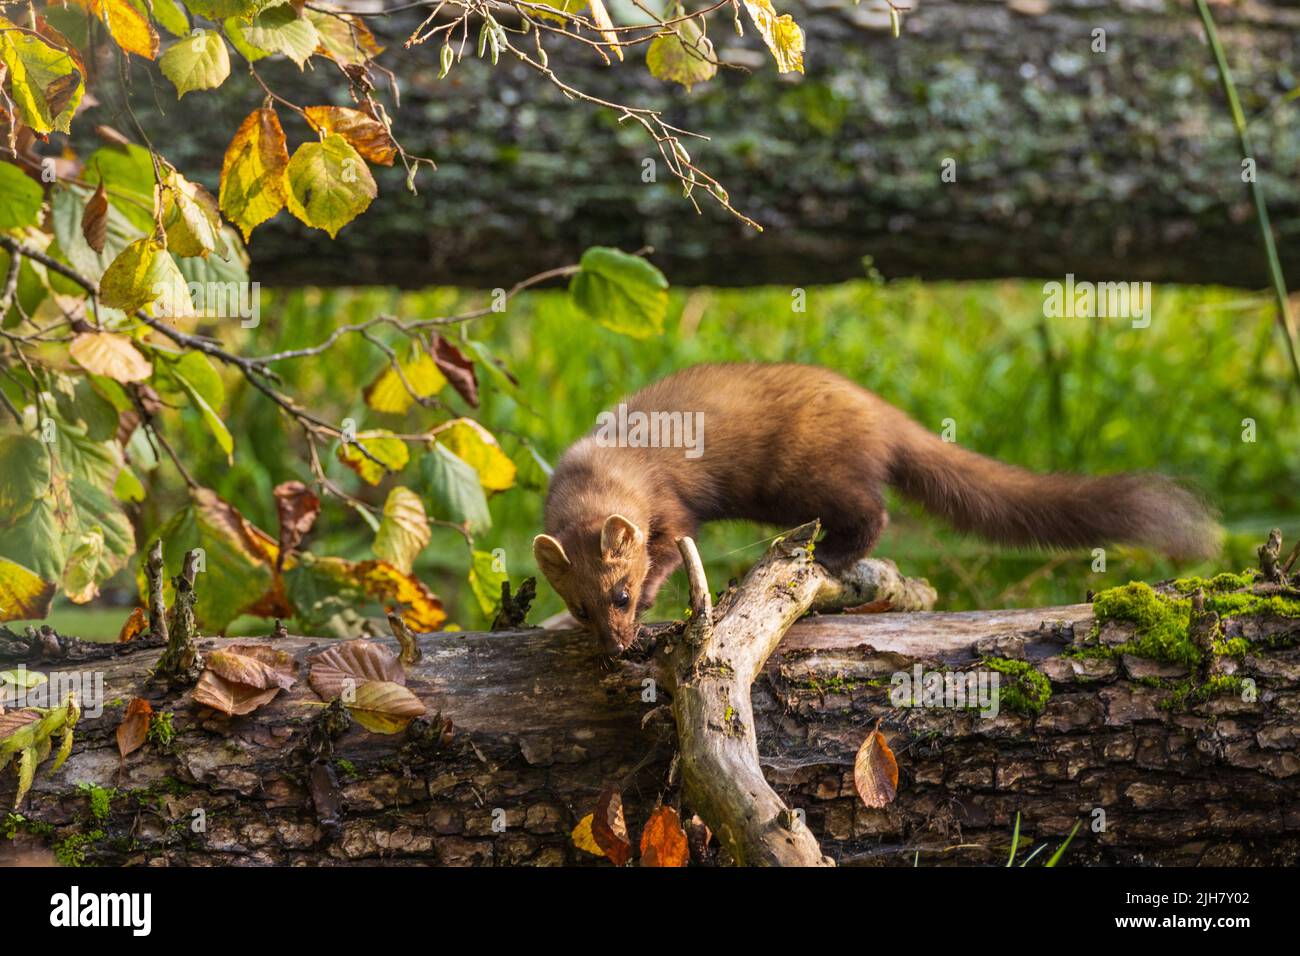 Pine Marten (Martes martes) close to water with lying tree in background, Bialowieza Forest, Poland, Europe Stock Photo